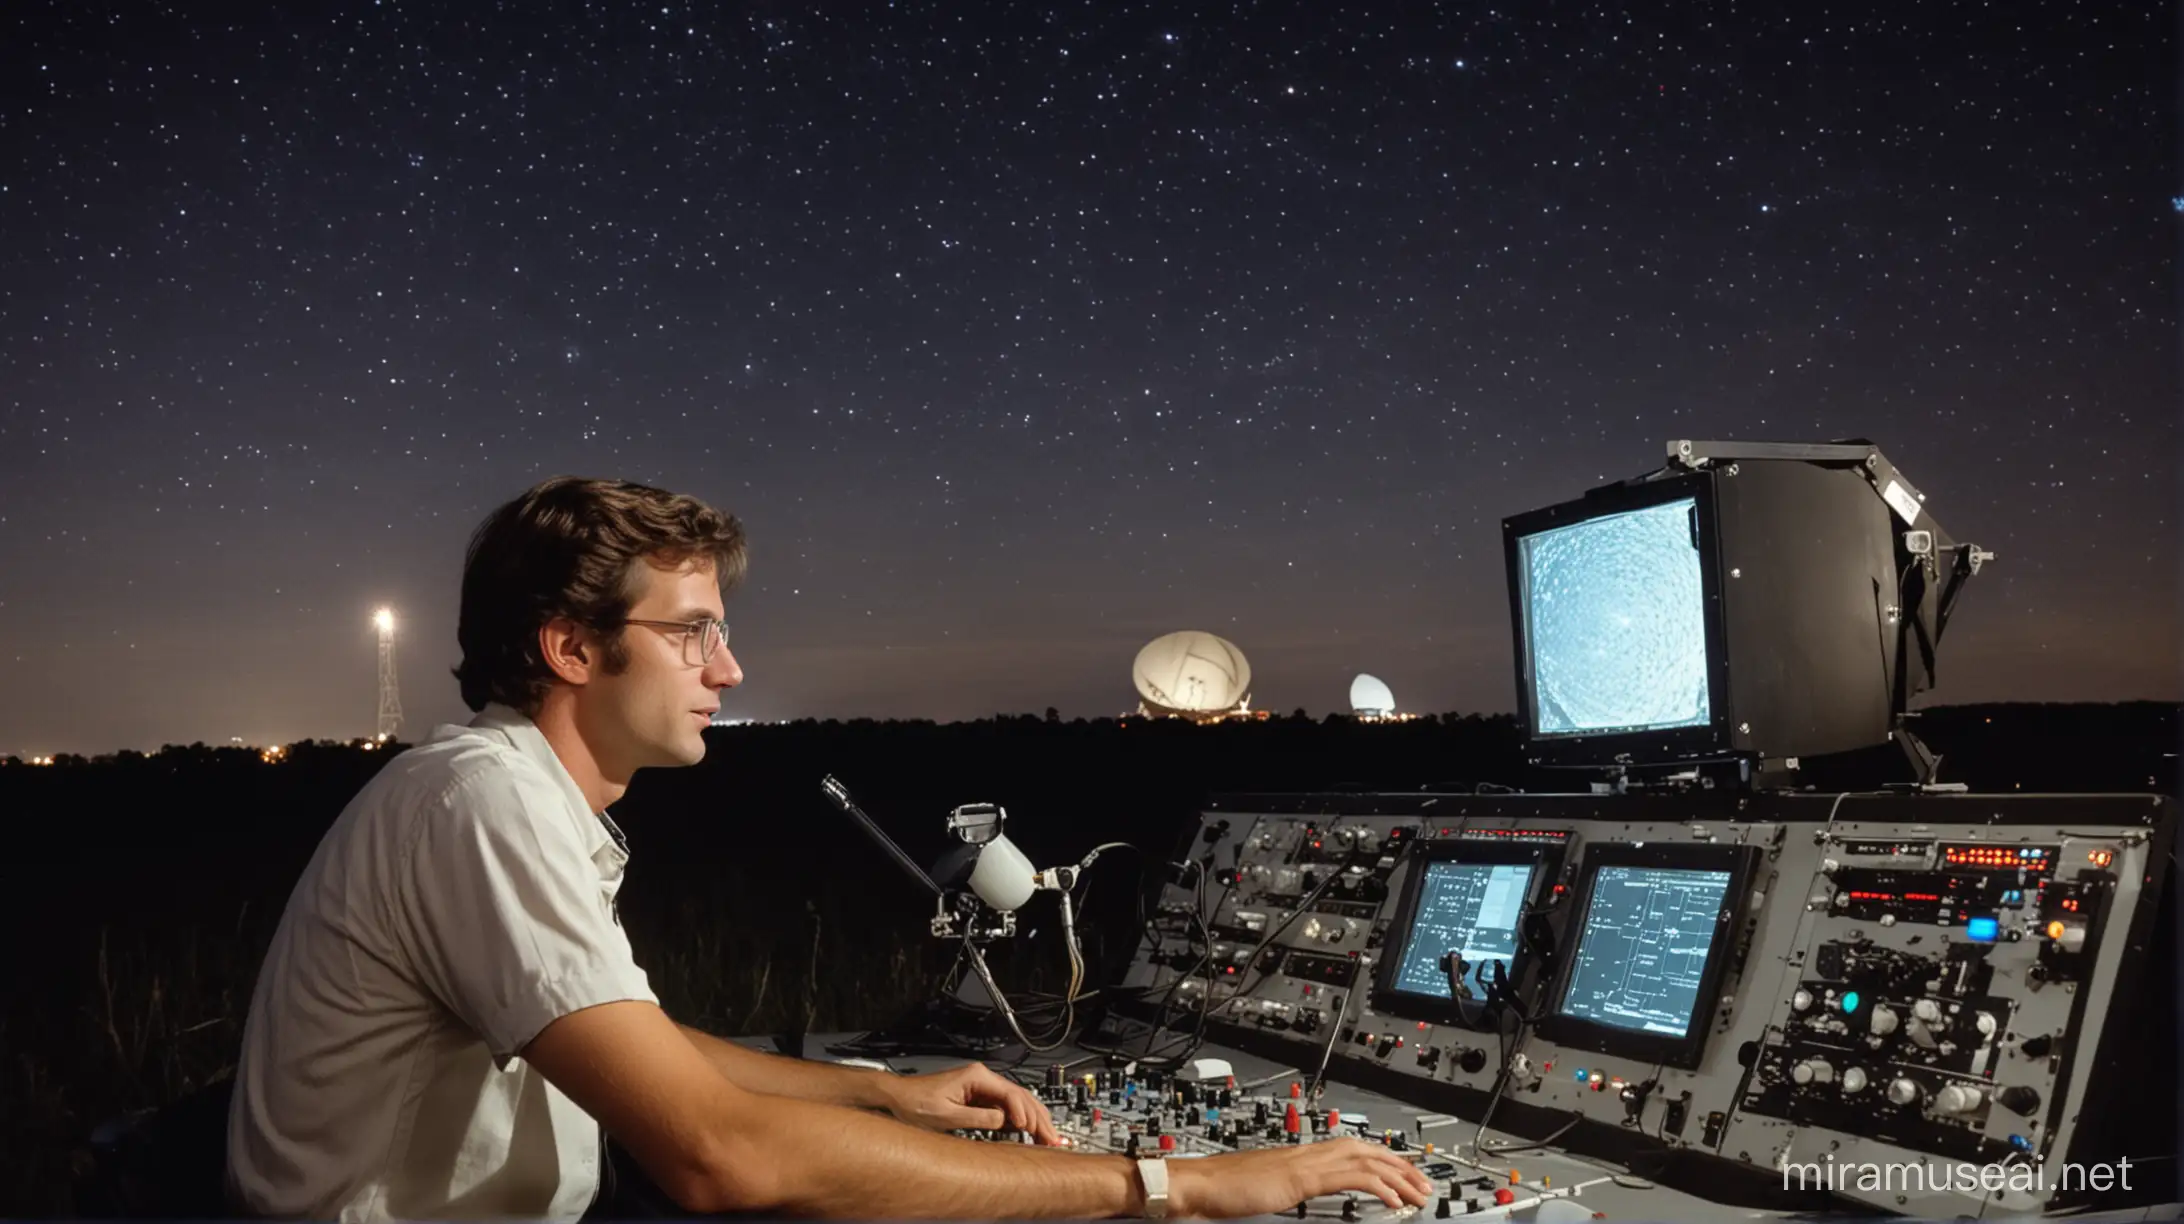 Capture a scene set in the summer of 1977 at Ohio State University's Big Ear radio telescope. Show Jerry Ehman, a young scientist, leaning over the control panel with a look of intense concentration as he monitors the telescope's readings. Behind him, the vast expanse of the night sky stretches out, dotted with twinkling stars. In the foreground, display screens flicker with data, highlighting the moment of the sudden signal's detection.